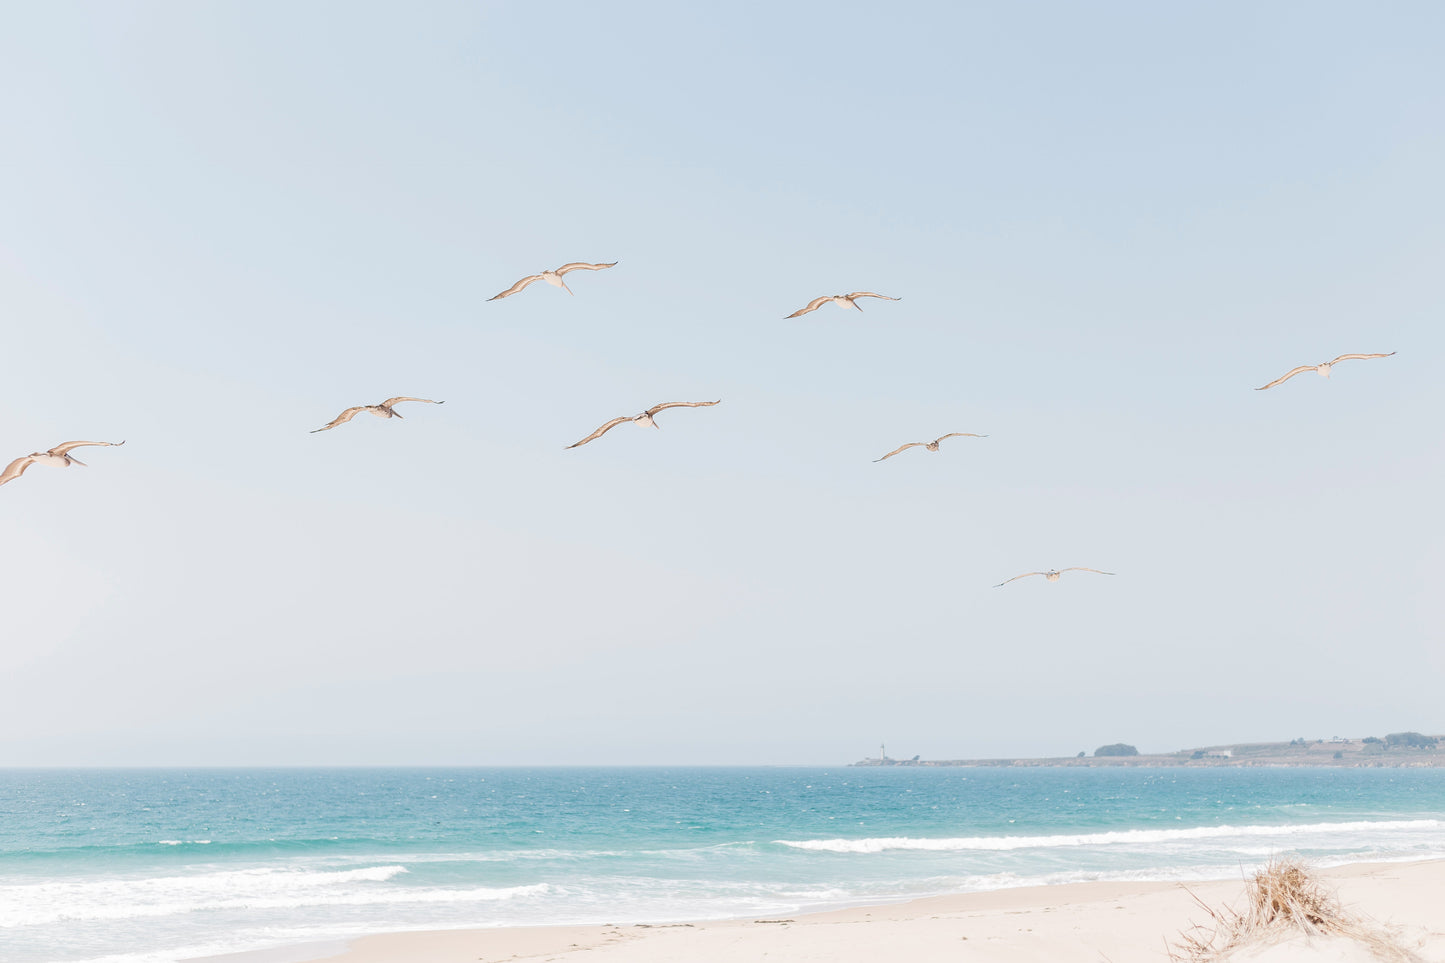 Pelicans of Pigeon Point